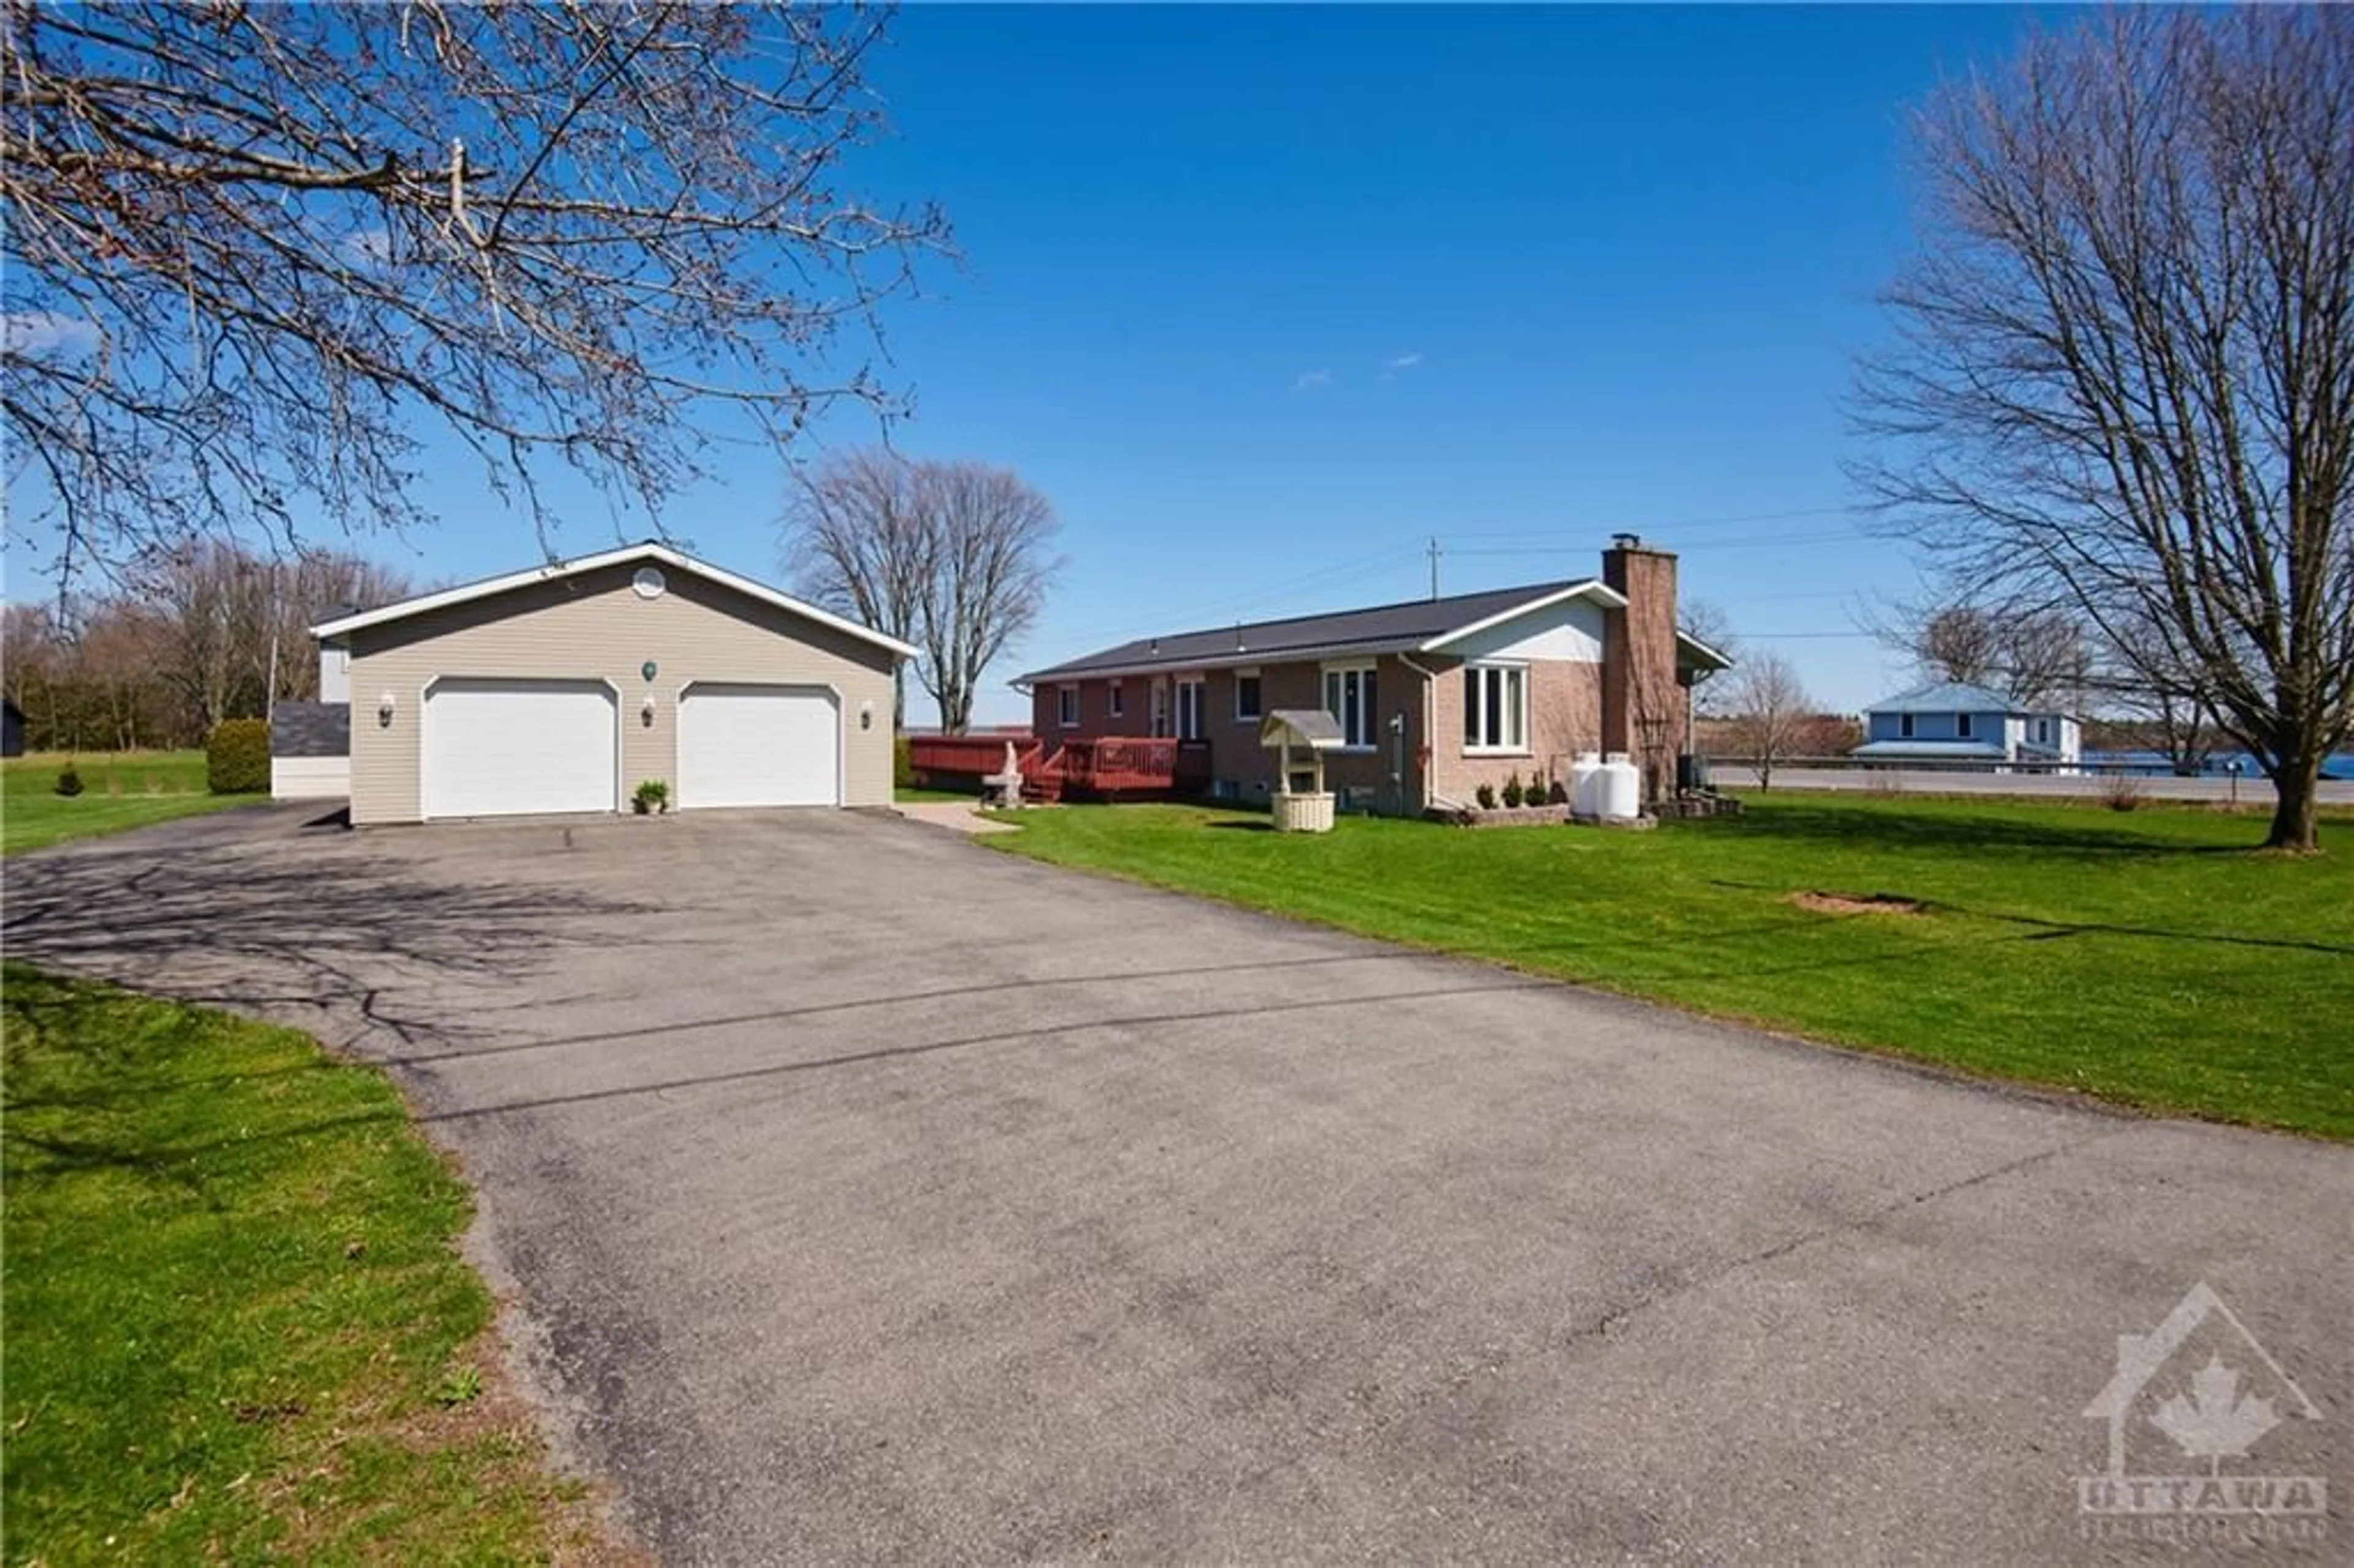 Frontside or backside of a home for 5865 MARINE STATION Rd, Iroquois Ontario K0E 1K0